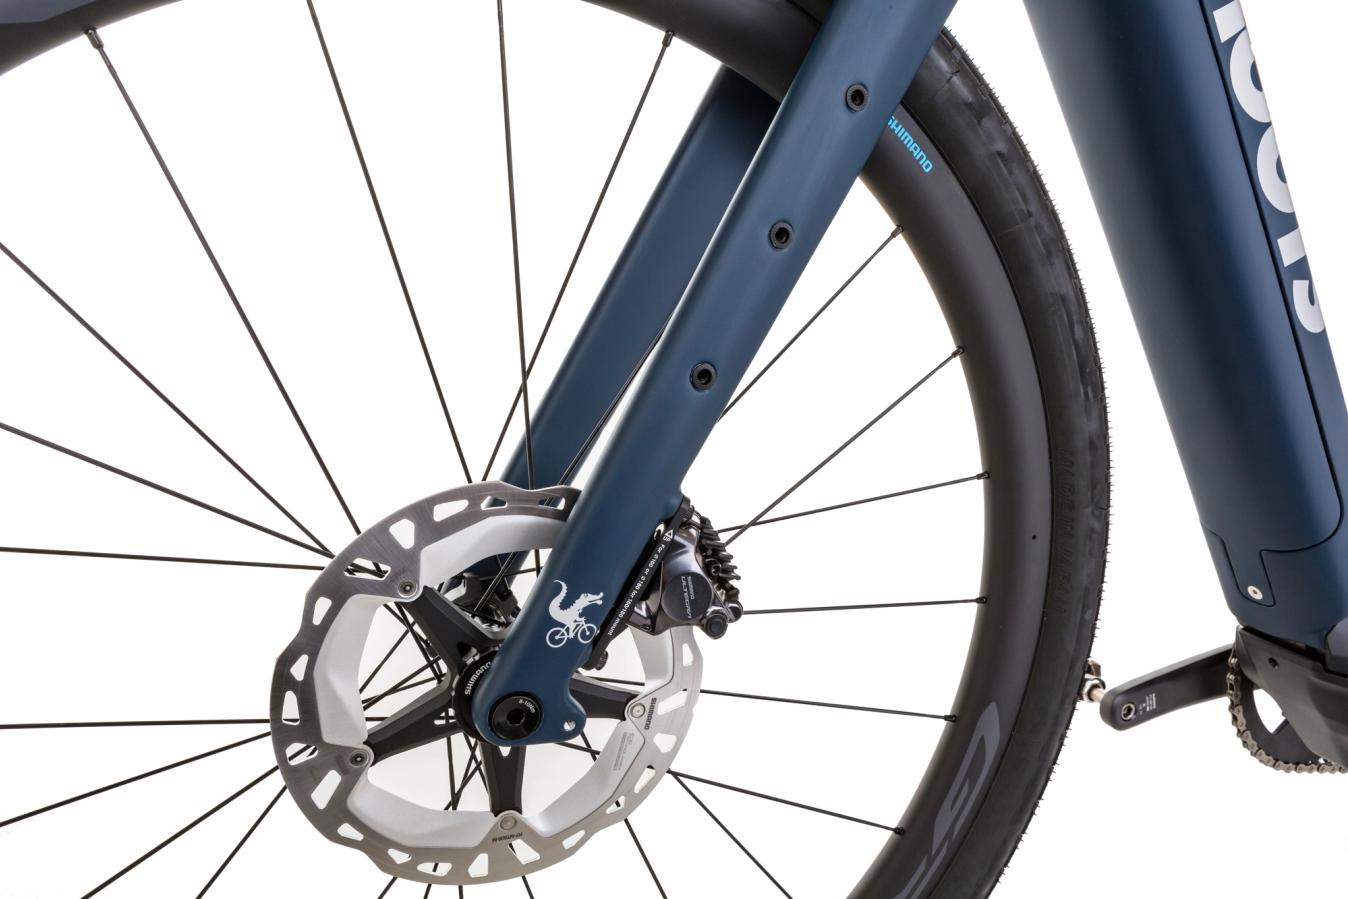 Both fork legs feature three-pack mounting options to give riders the versatility to configure their bike for the adventure ahead